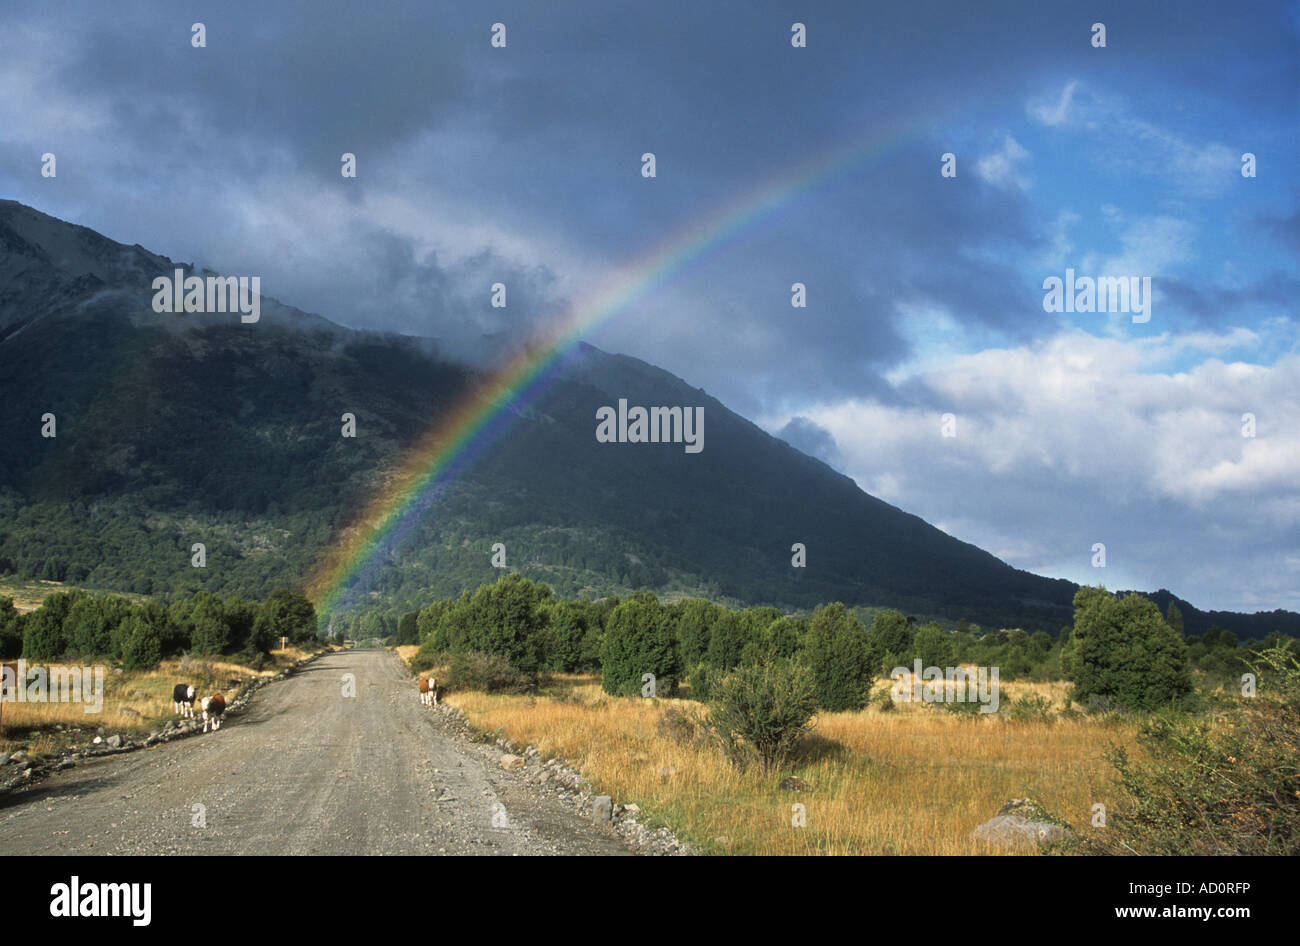 Rainbow over Patagonian steppe and lonely road, Lanin National Park, Neuquen Province, Argentina Stock Photo